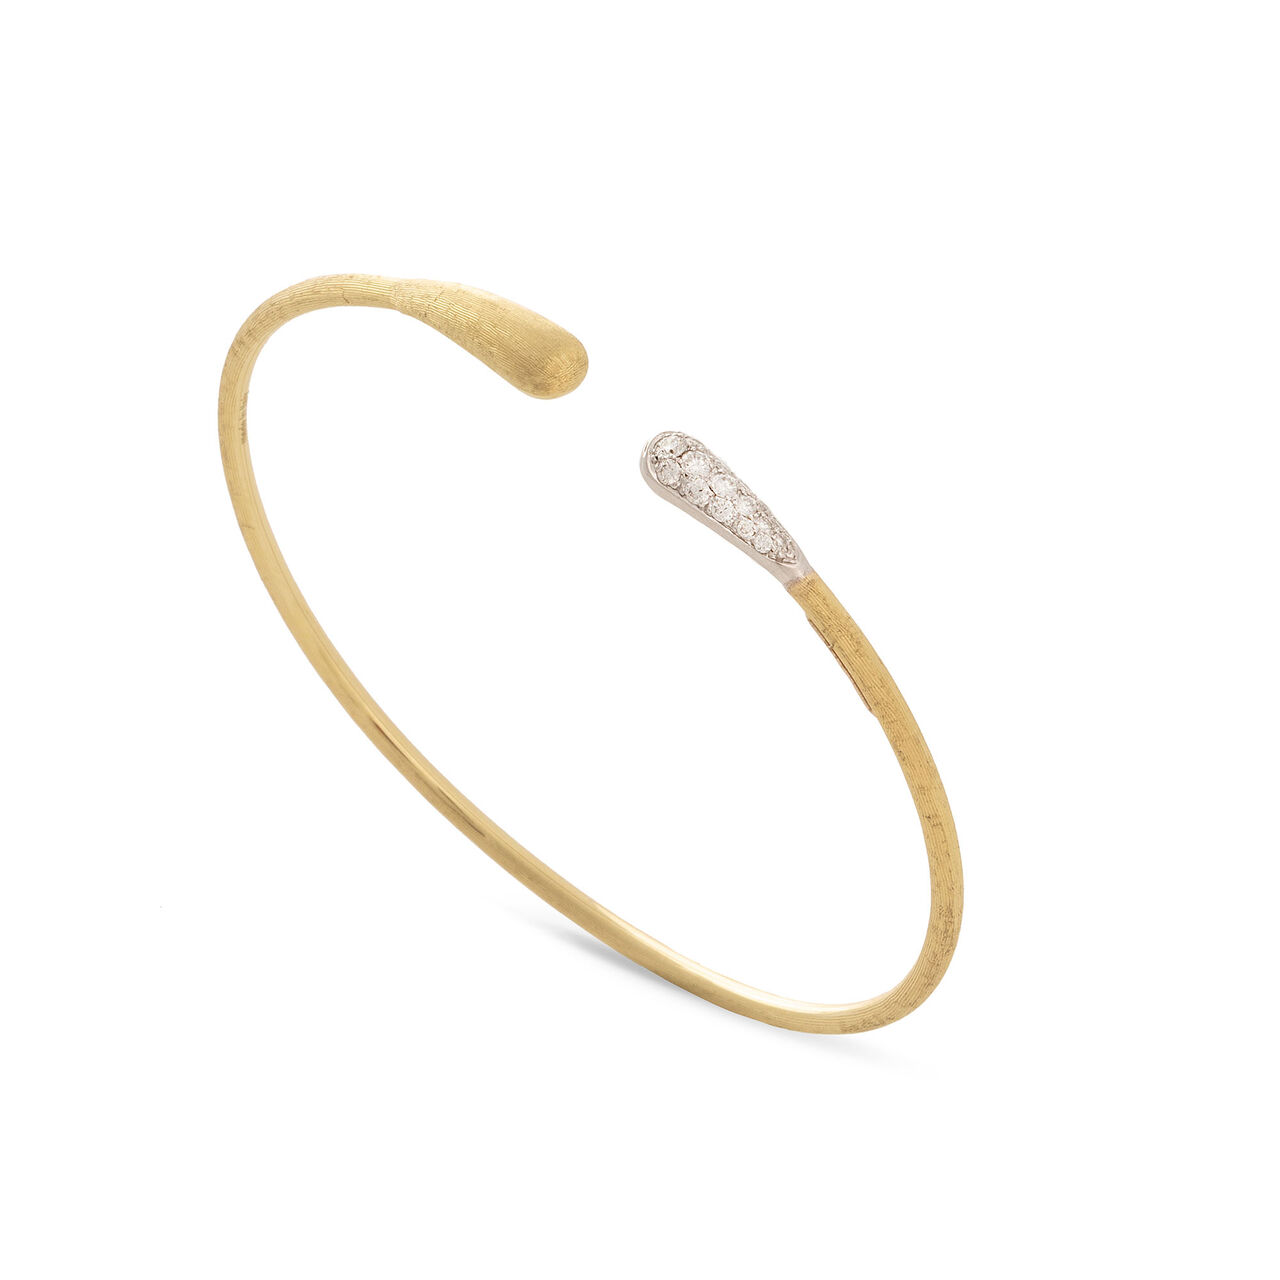 maison birks marco bicego lucia yellow gold and diamond kissing cuff bracelet sb109 b yw q6 image number 0